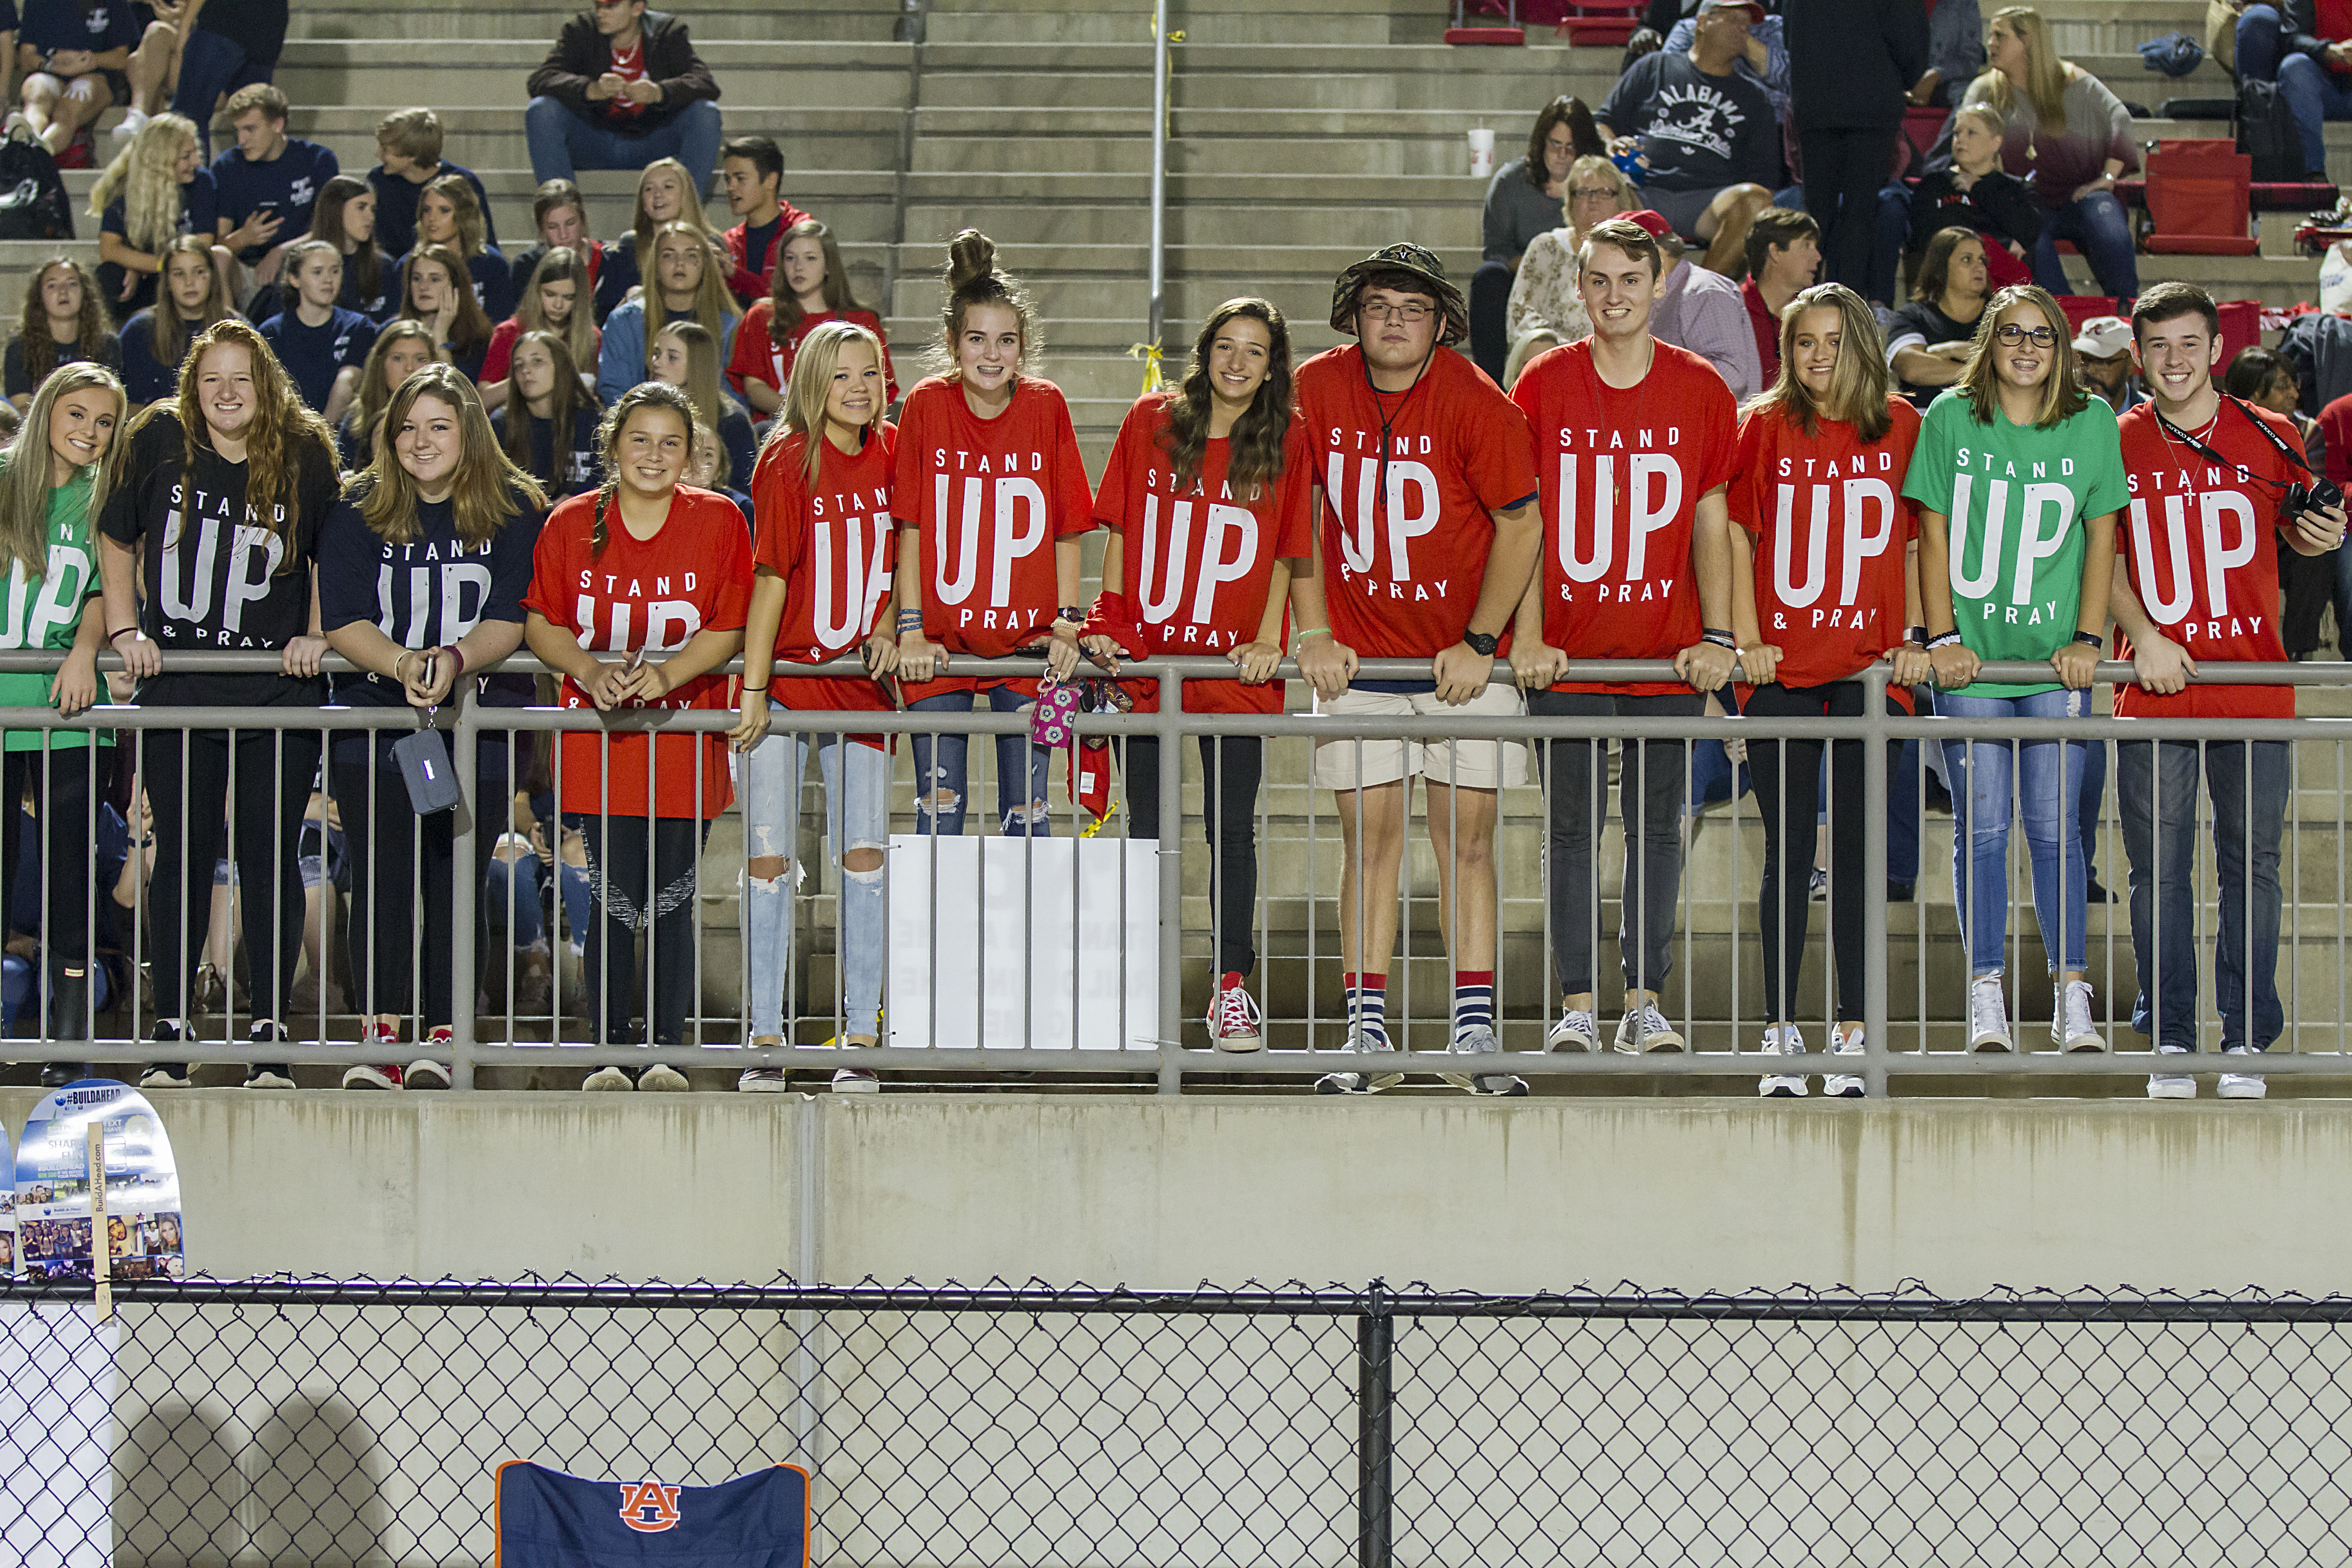 VIDEO: Hewitt-Trussville students recite the Lord's Prayer at football game